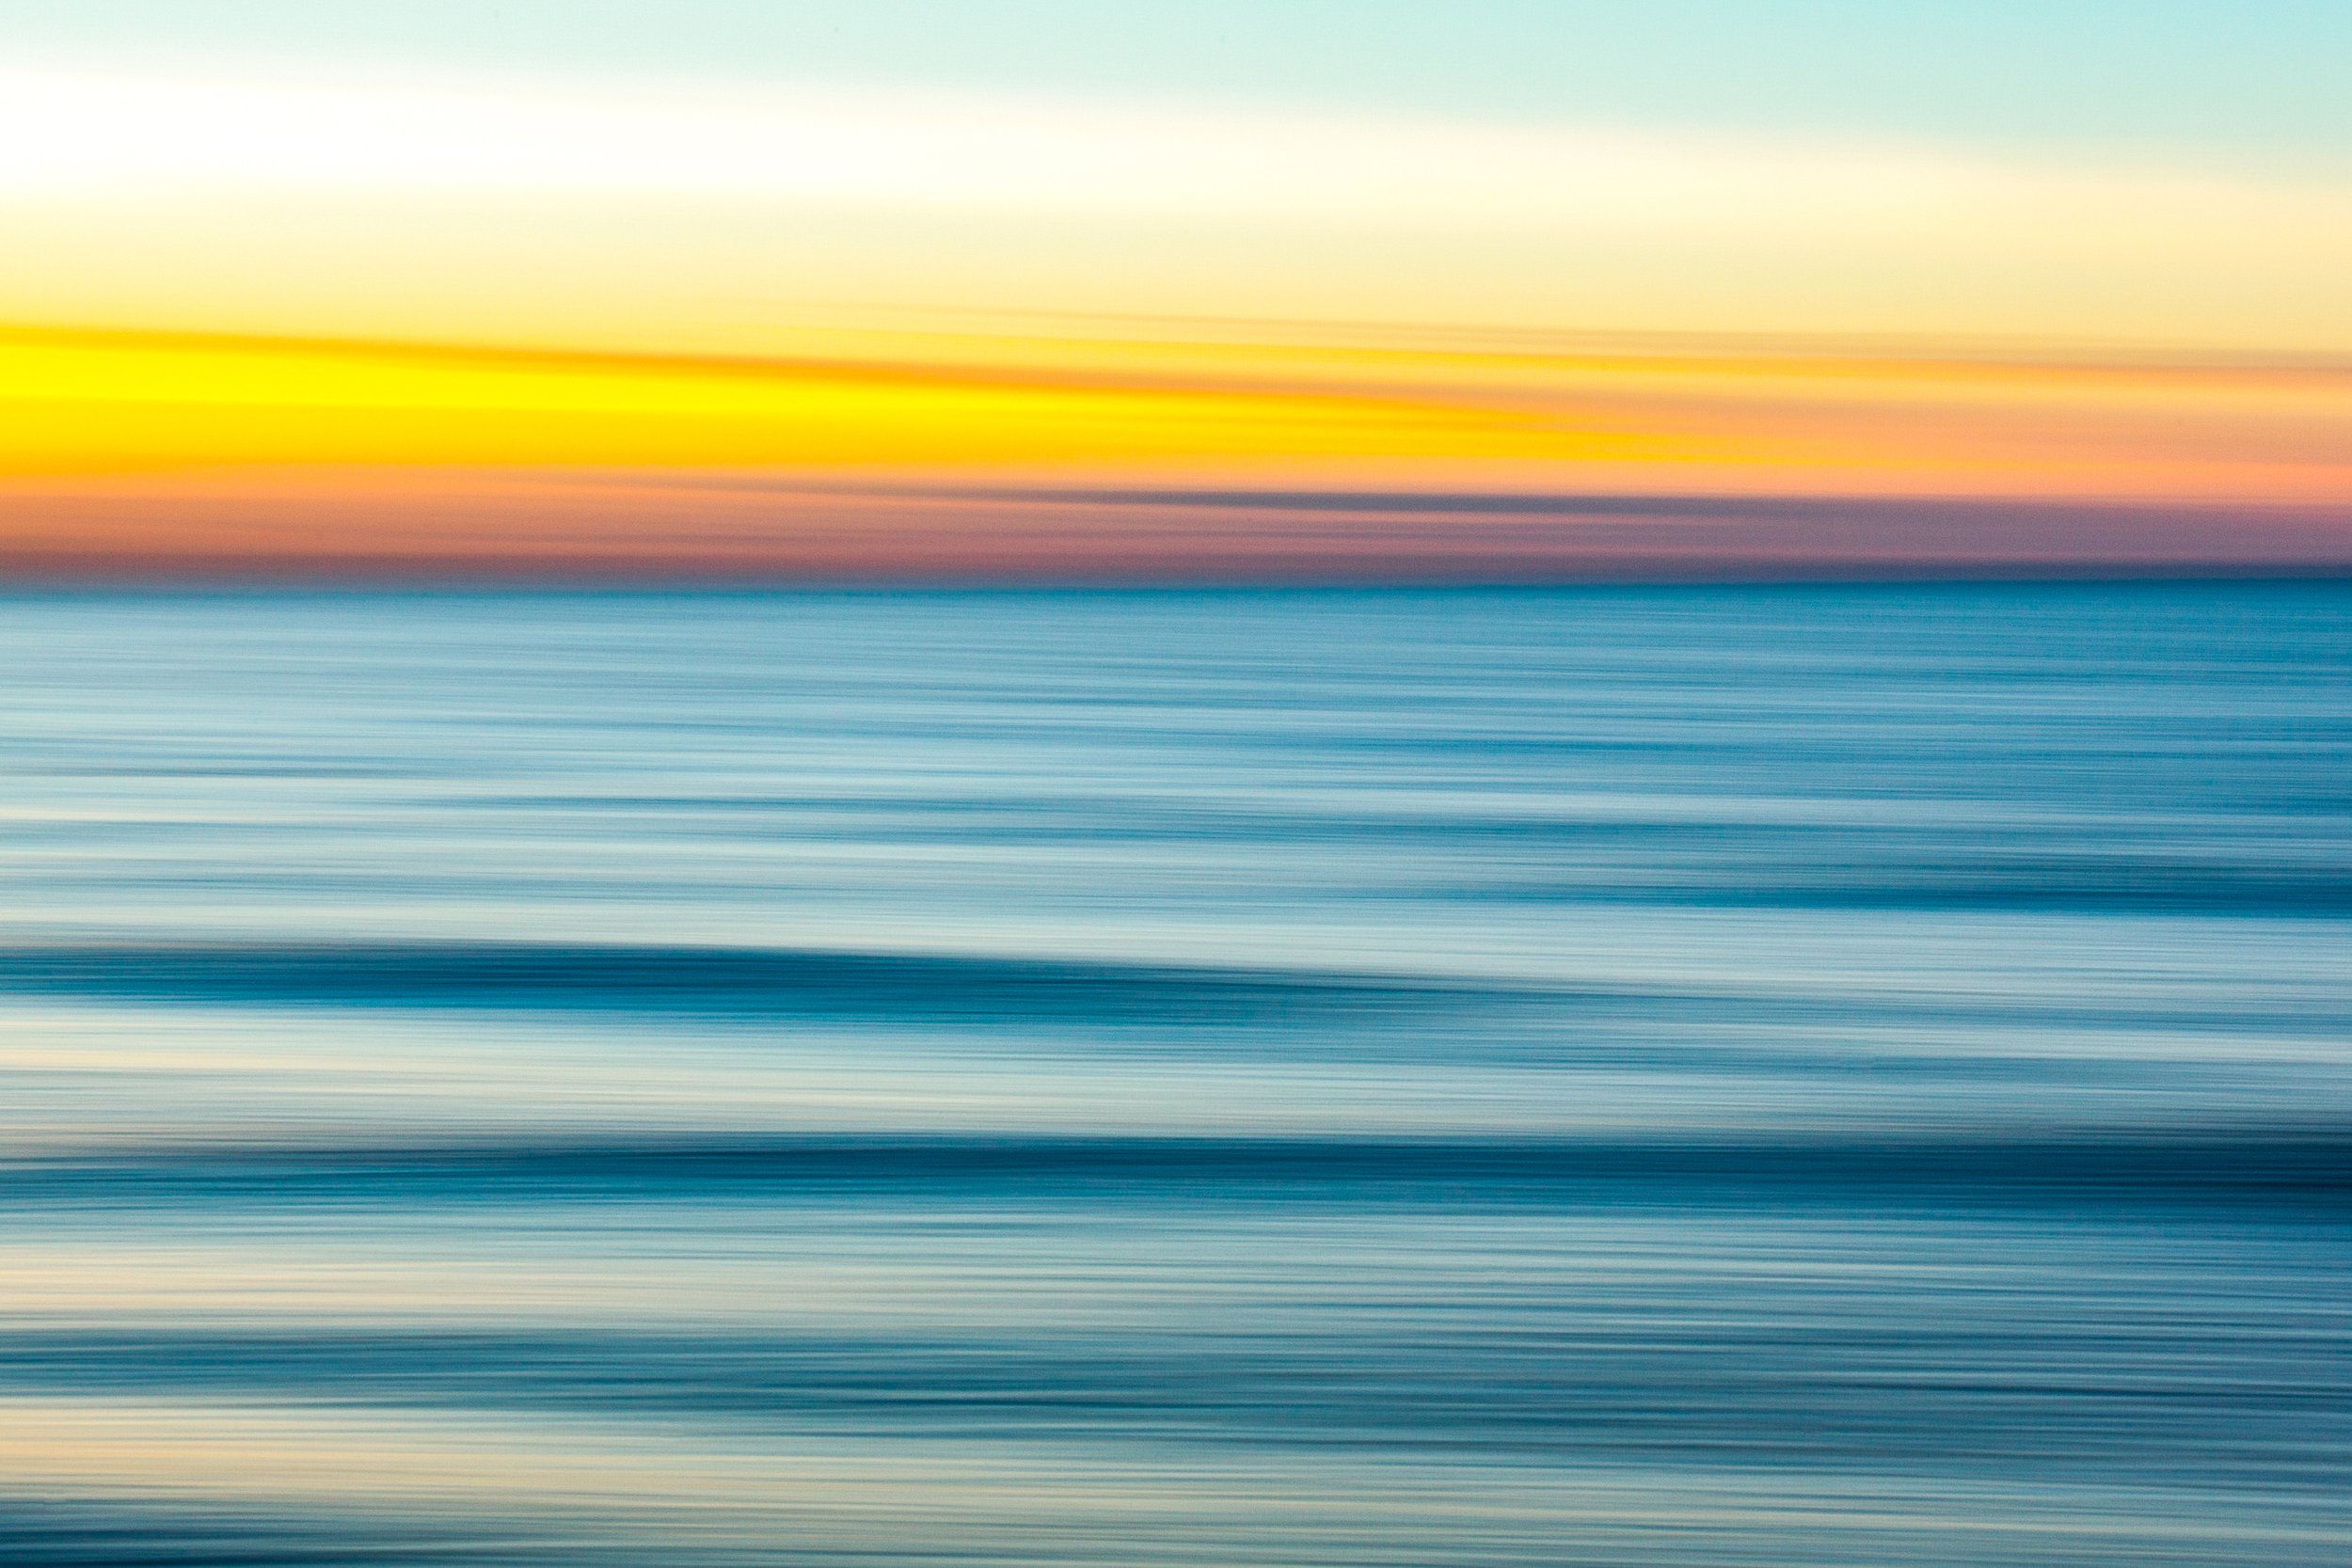 The coastline of England, an abstract seascape image.